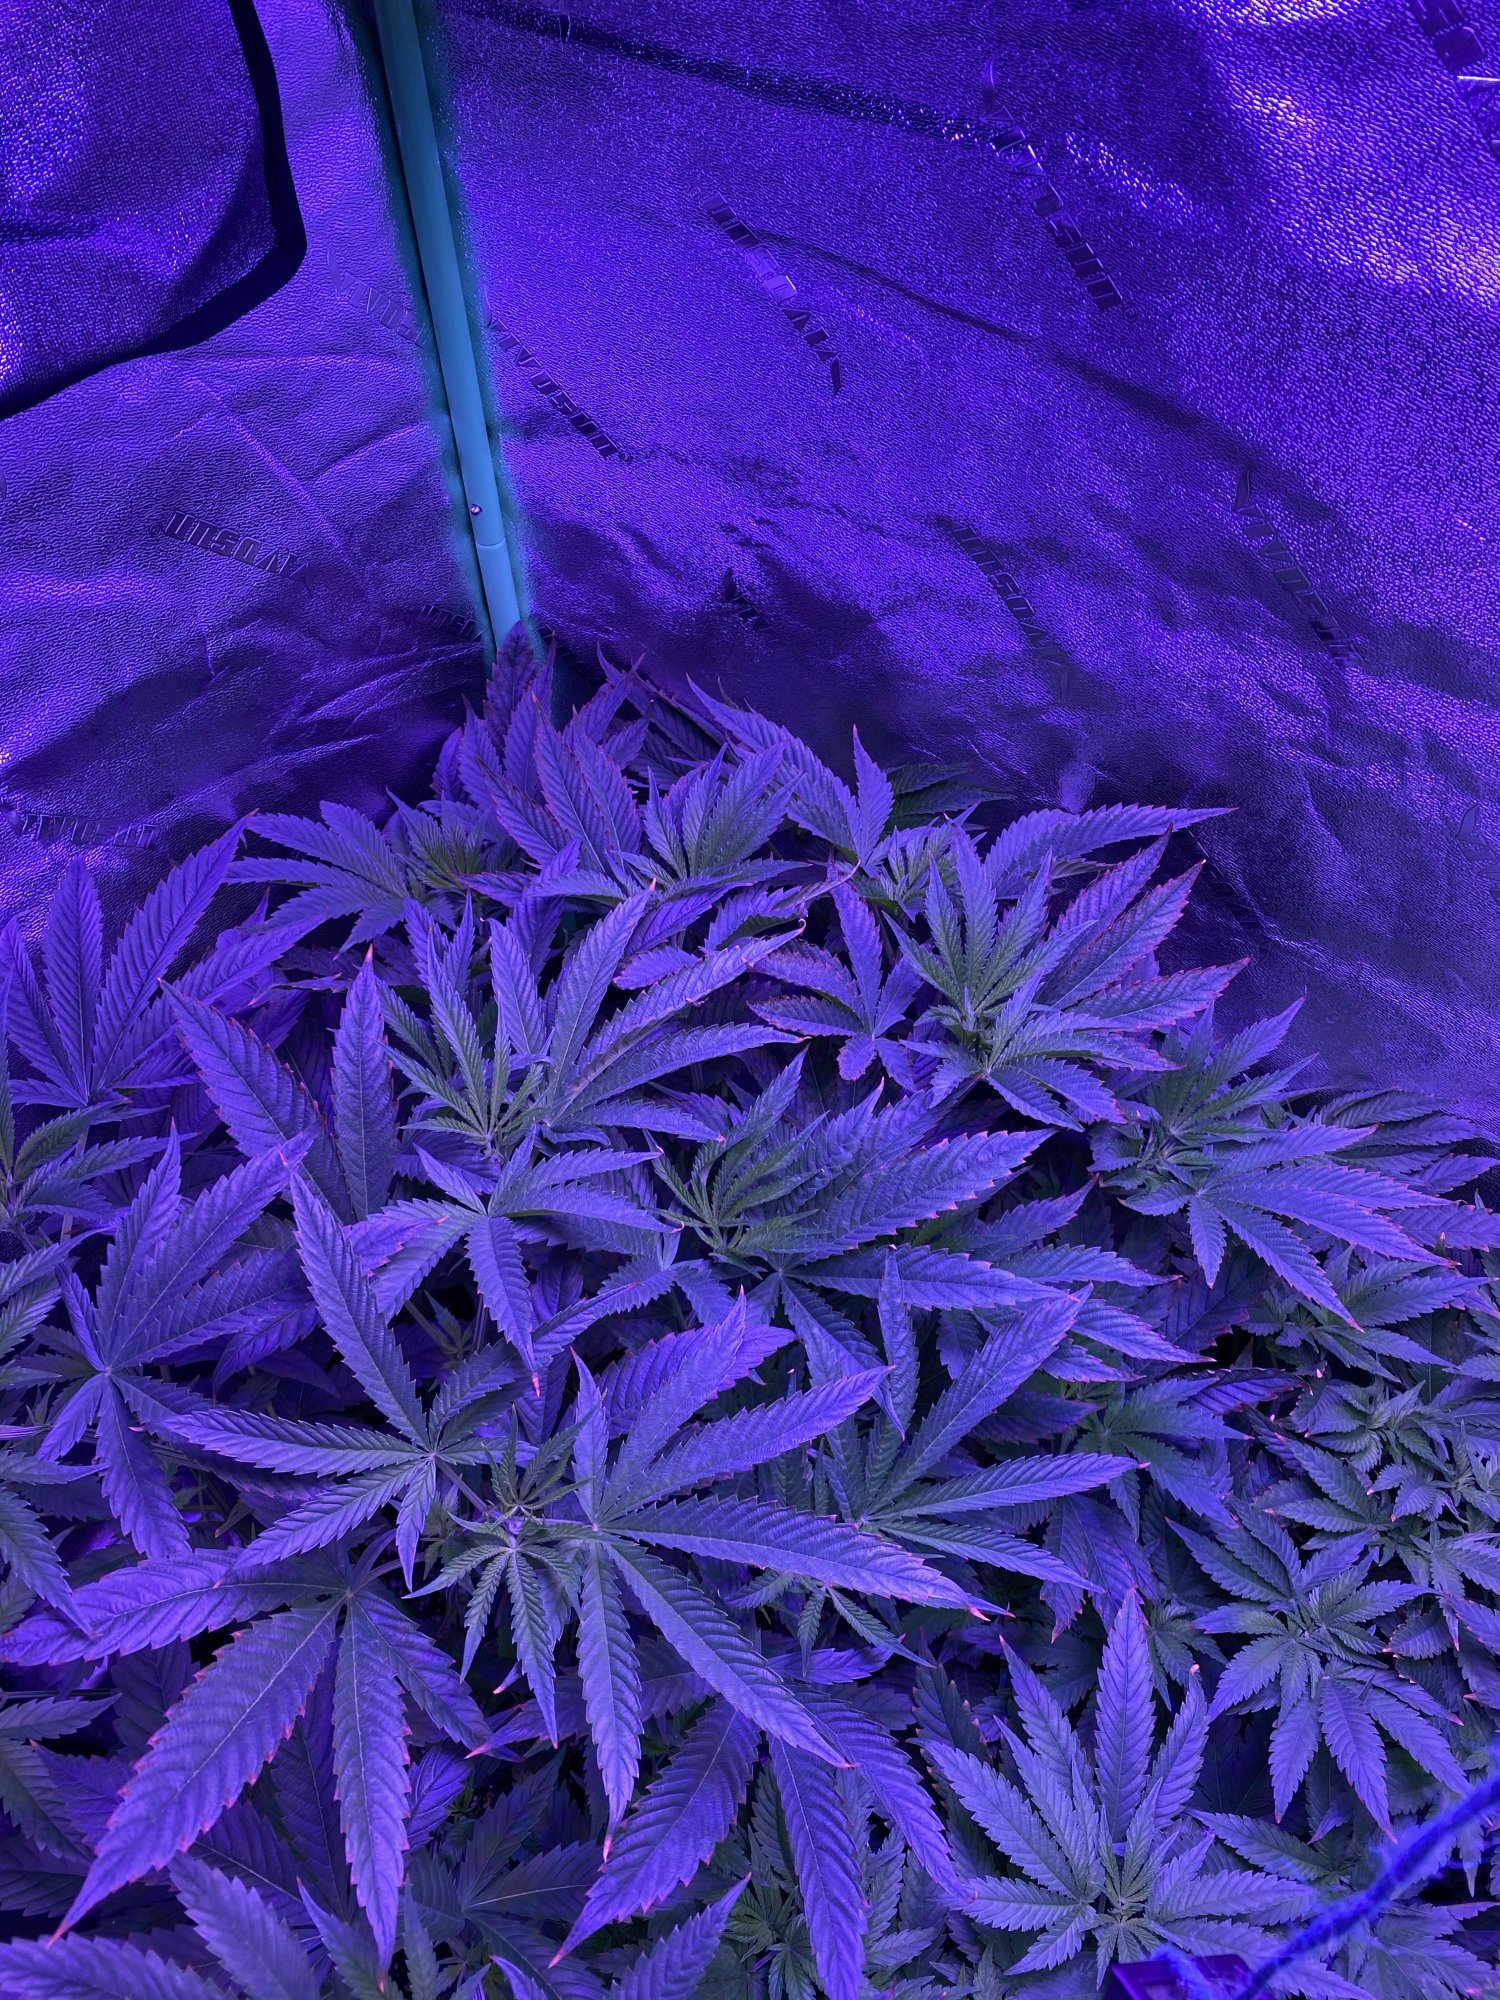 Heat stress and nute burn advice please 2